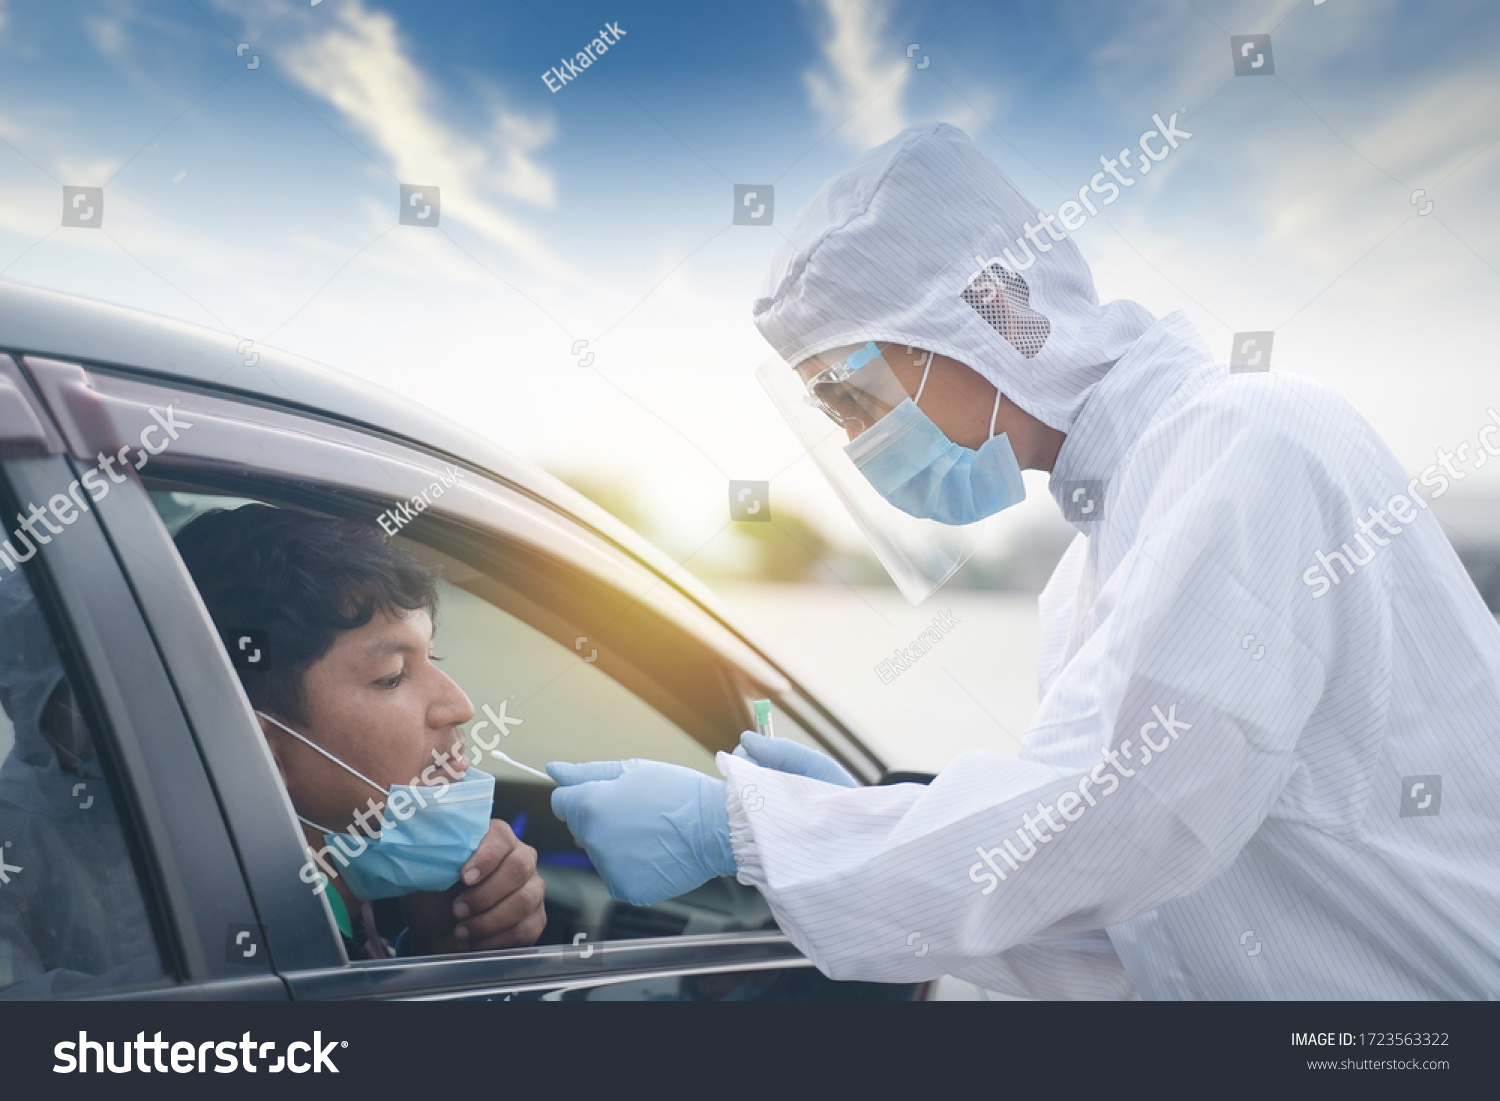 Medical worker in protective suit screening driver to sampling secretion to check for Covid-19. Drive thru test coronavirus fast track. Concept prevention coronavirus outbreak. #1723563322